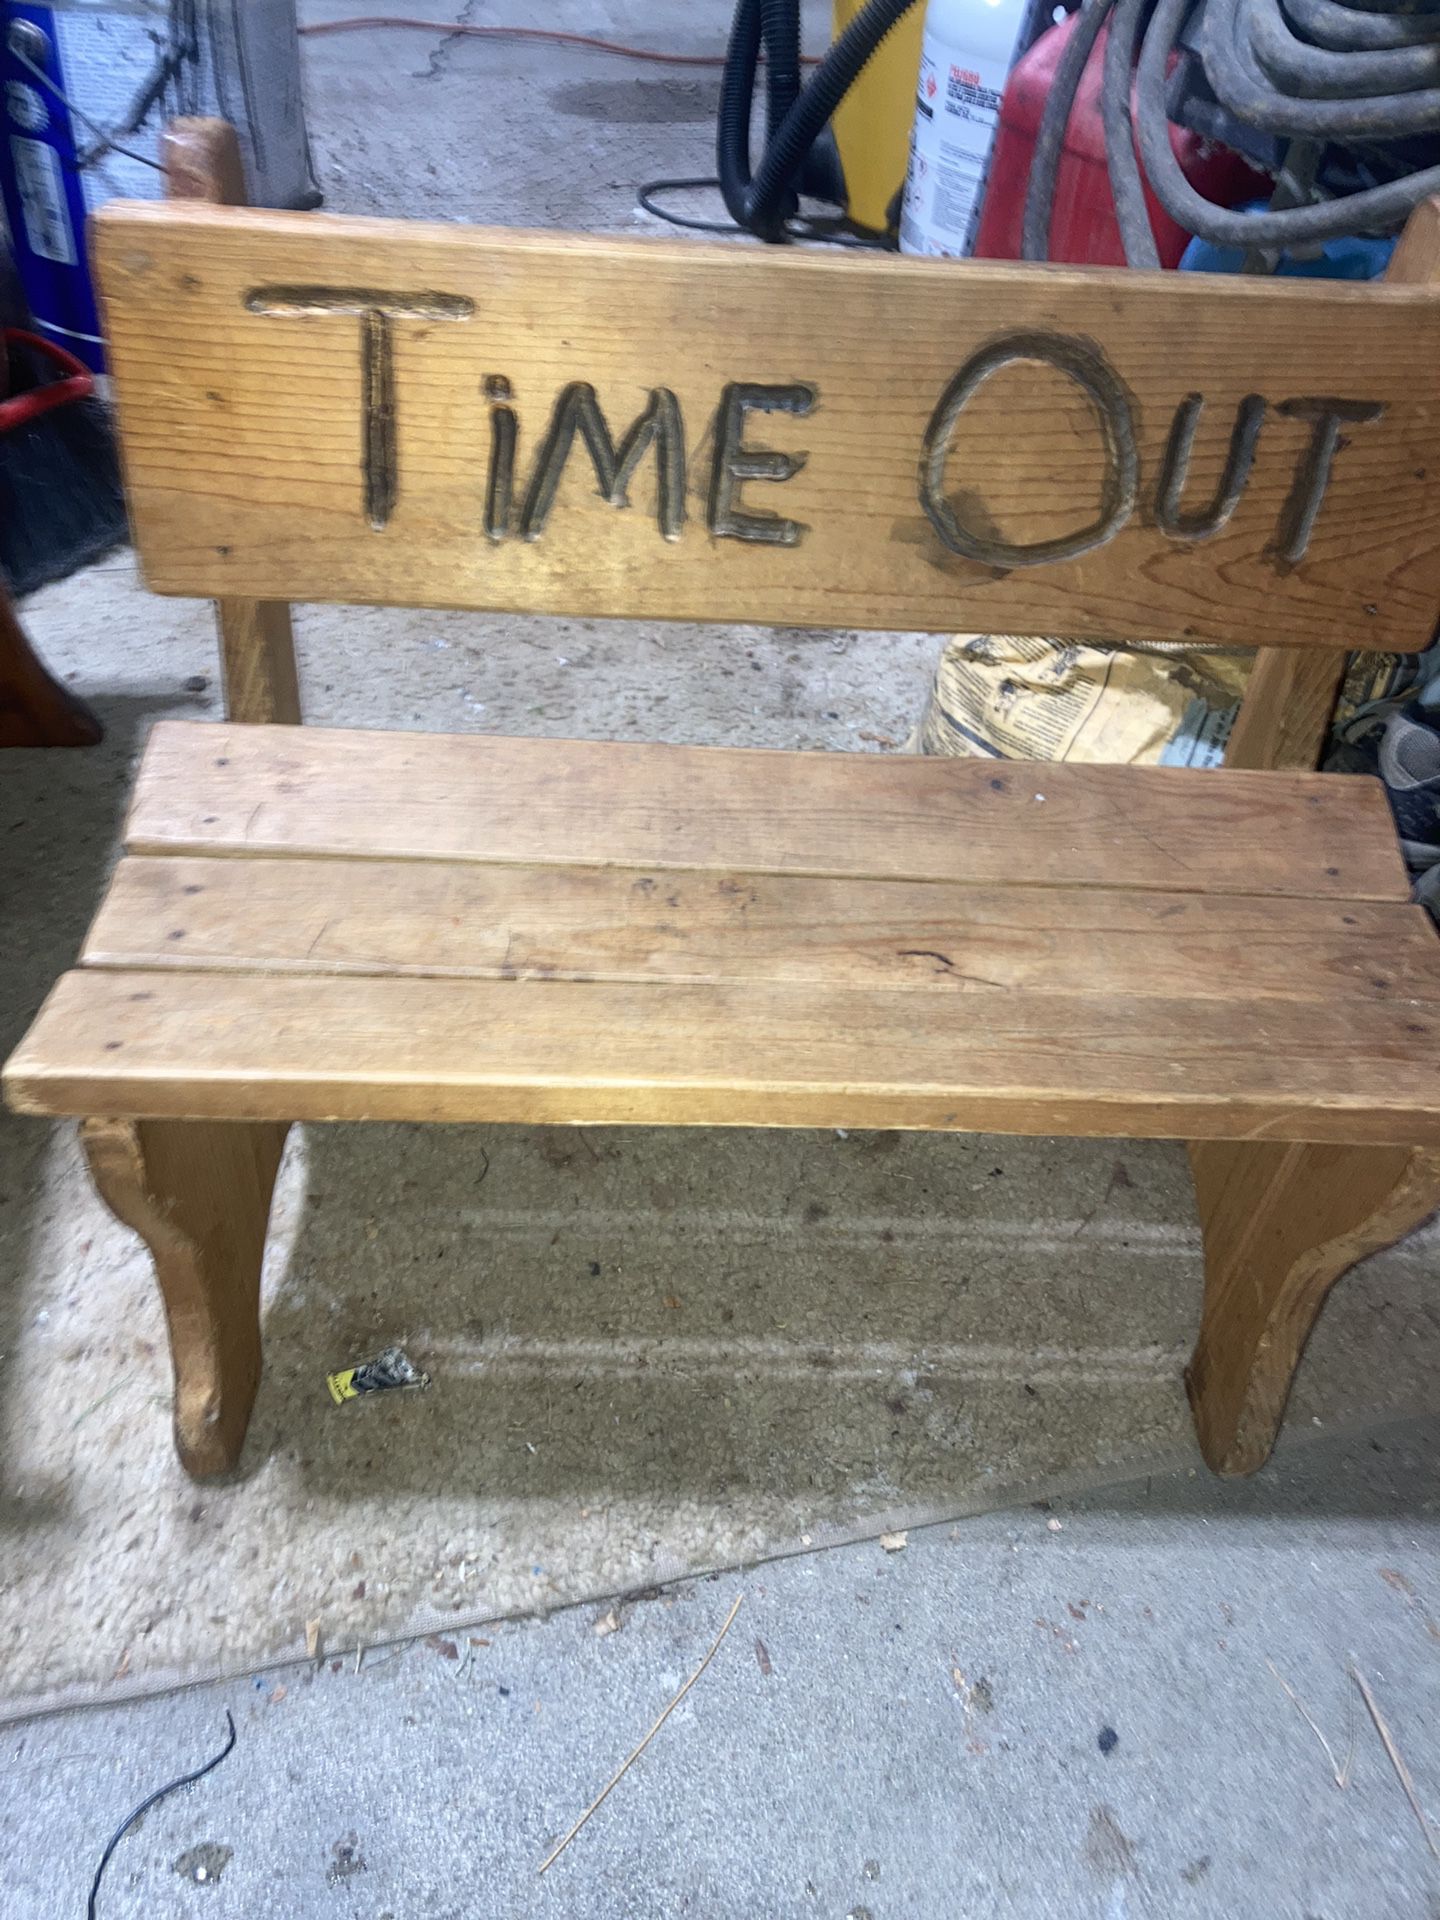 Child’s Time Out Seat